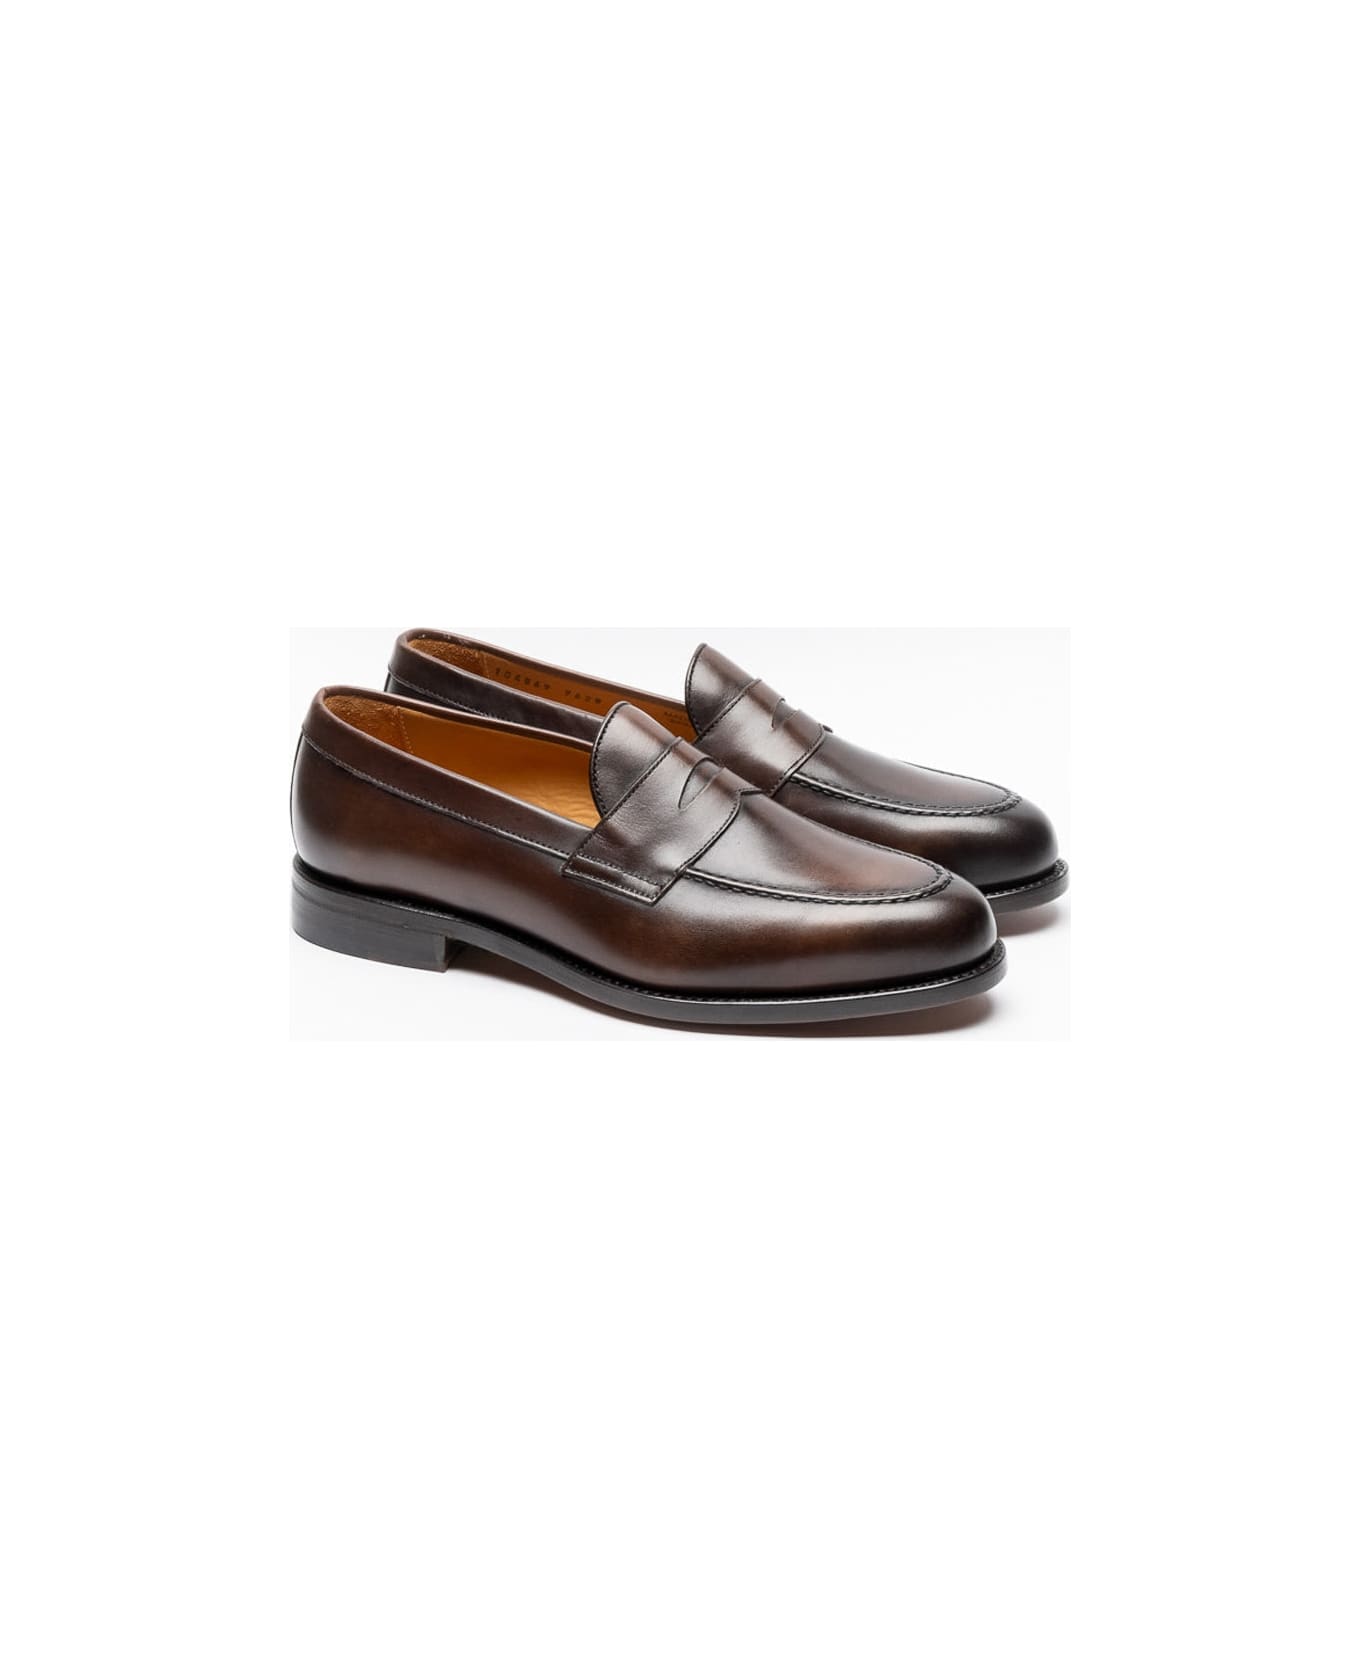 Berwick 1707 Brown Polished Leather Loafer - Marrone